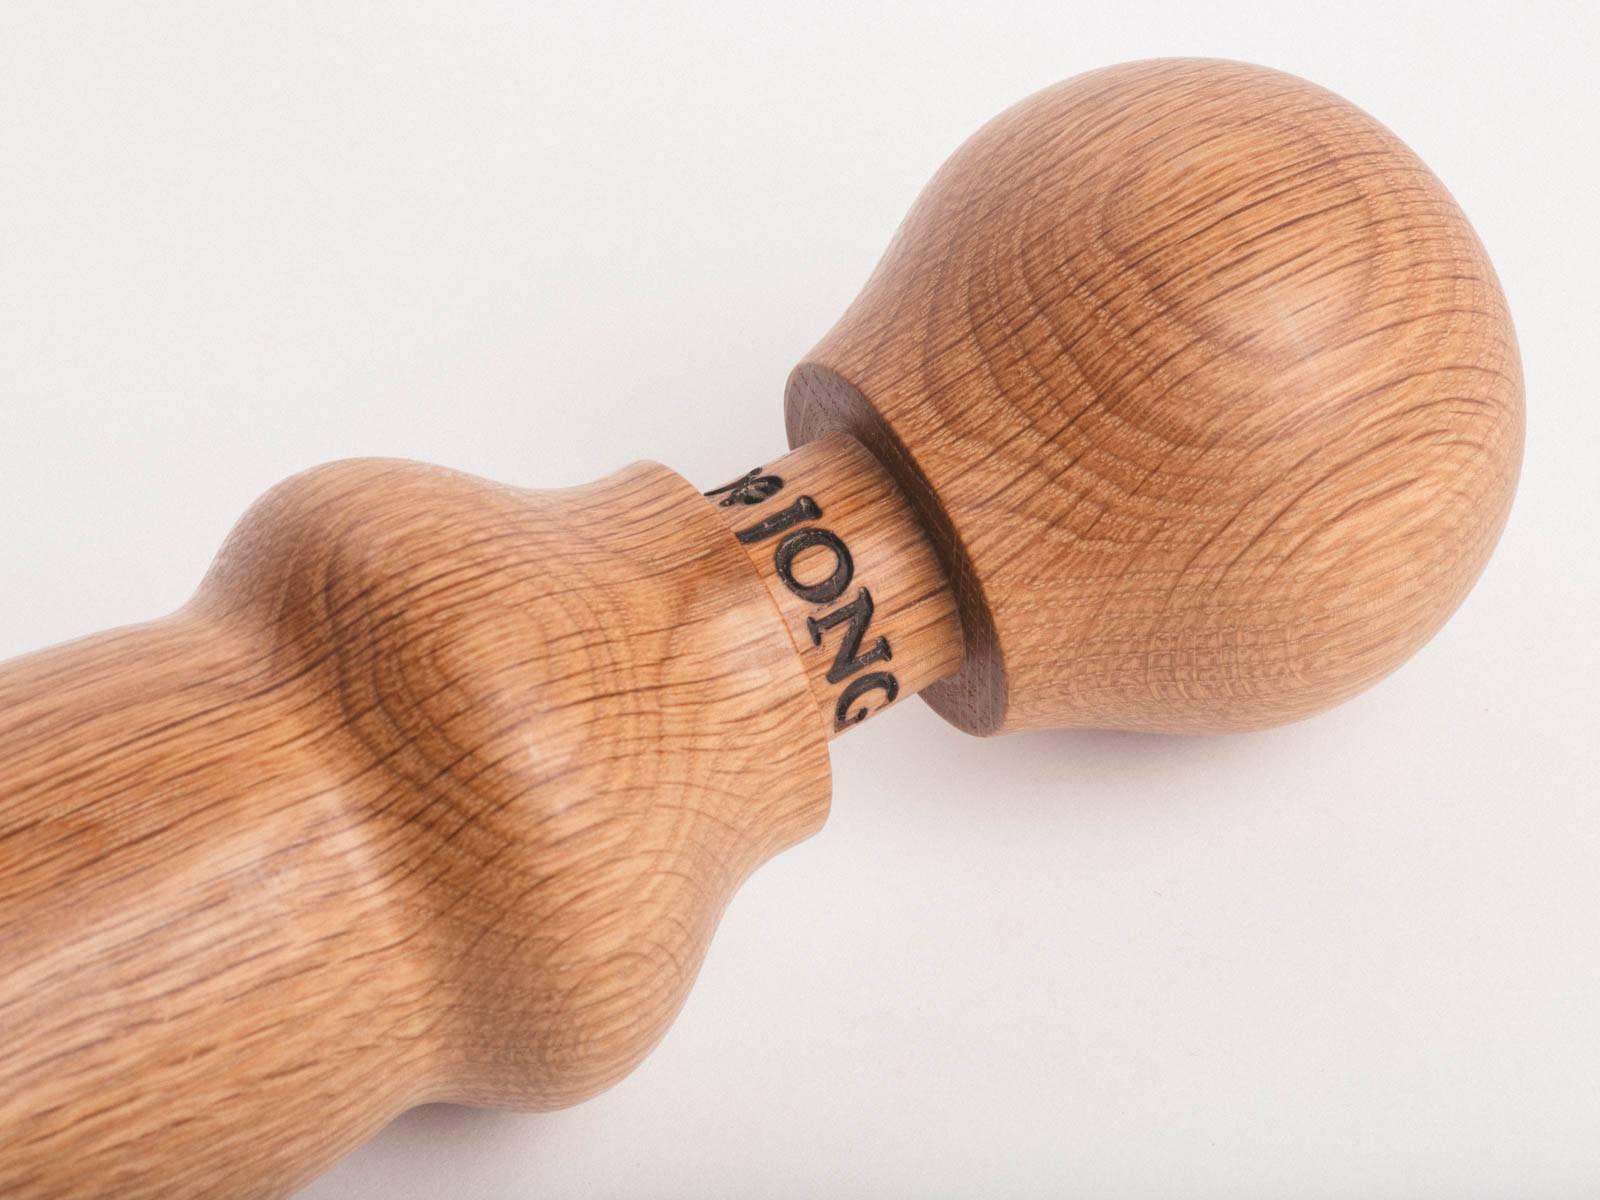 Hand-Crafted Butler Pepper Mill in Walnut For Sale